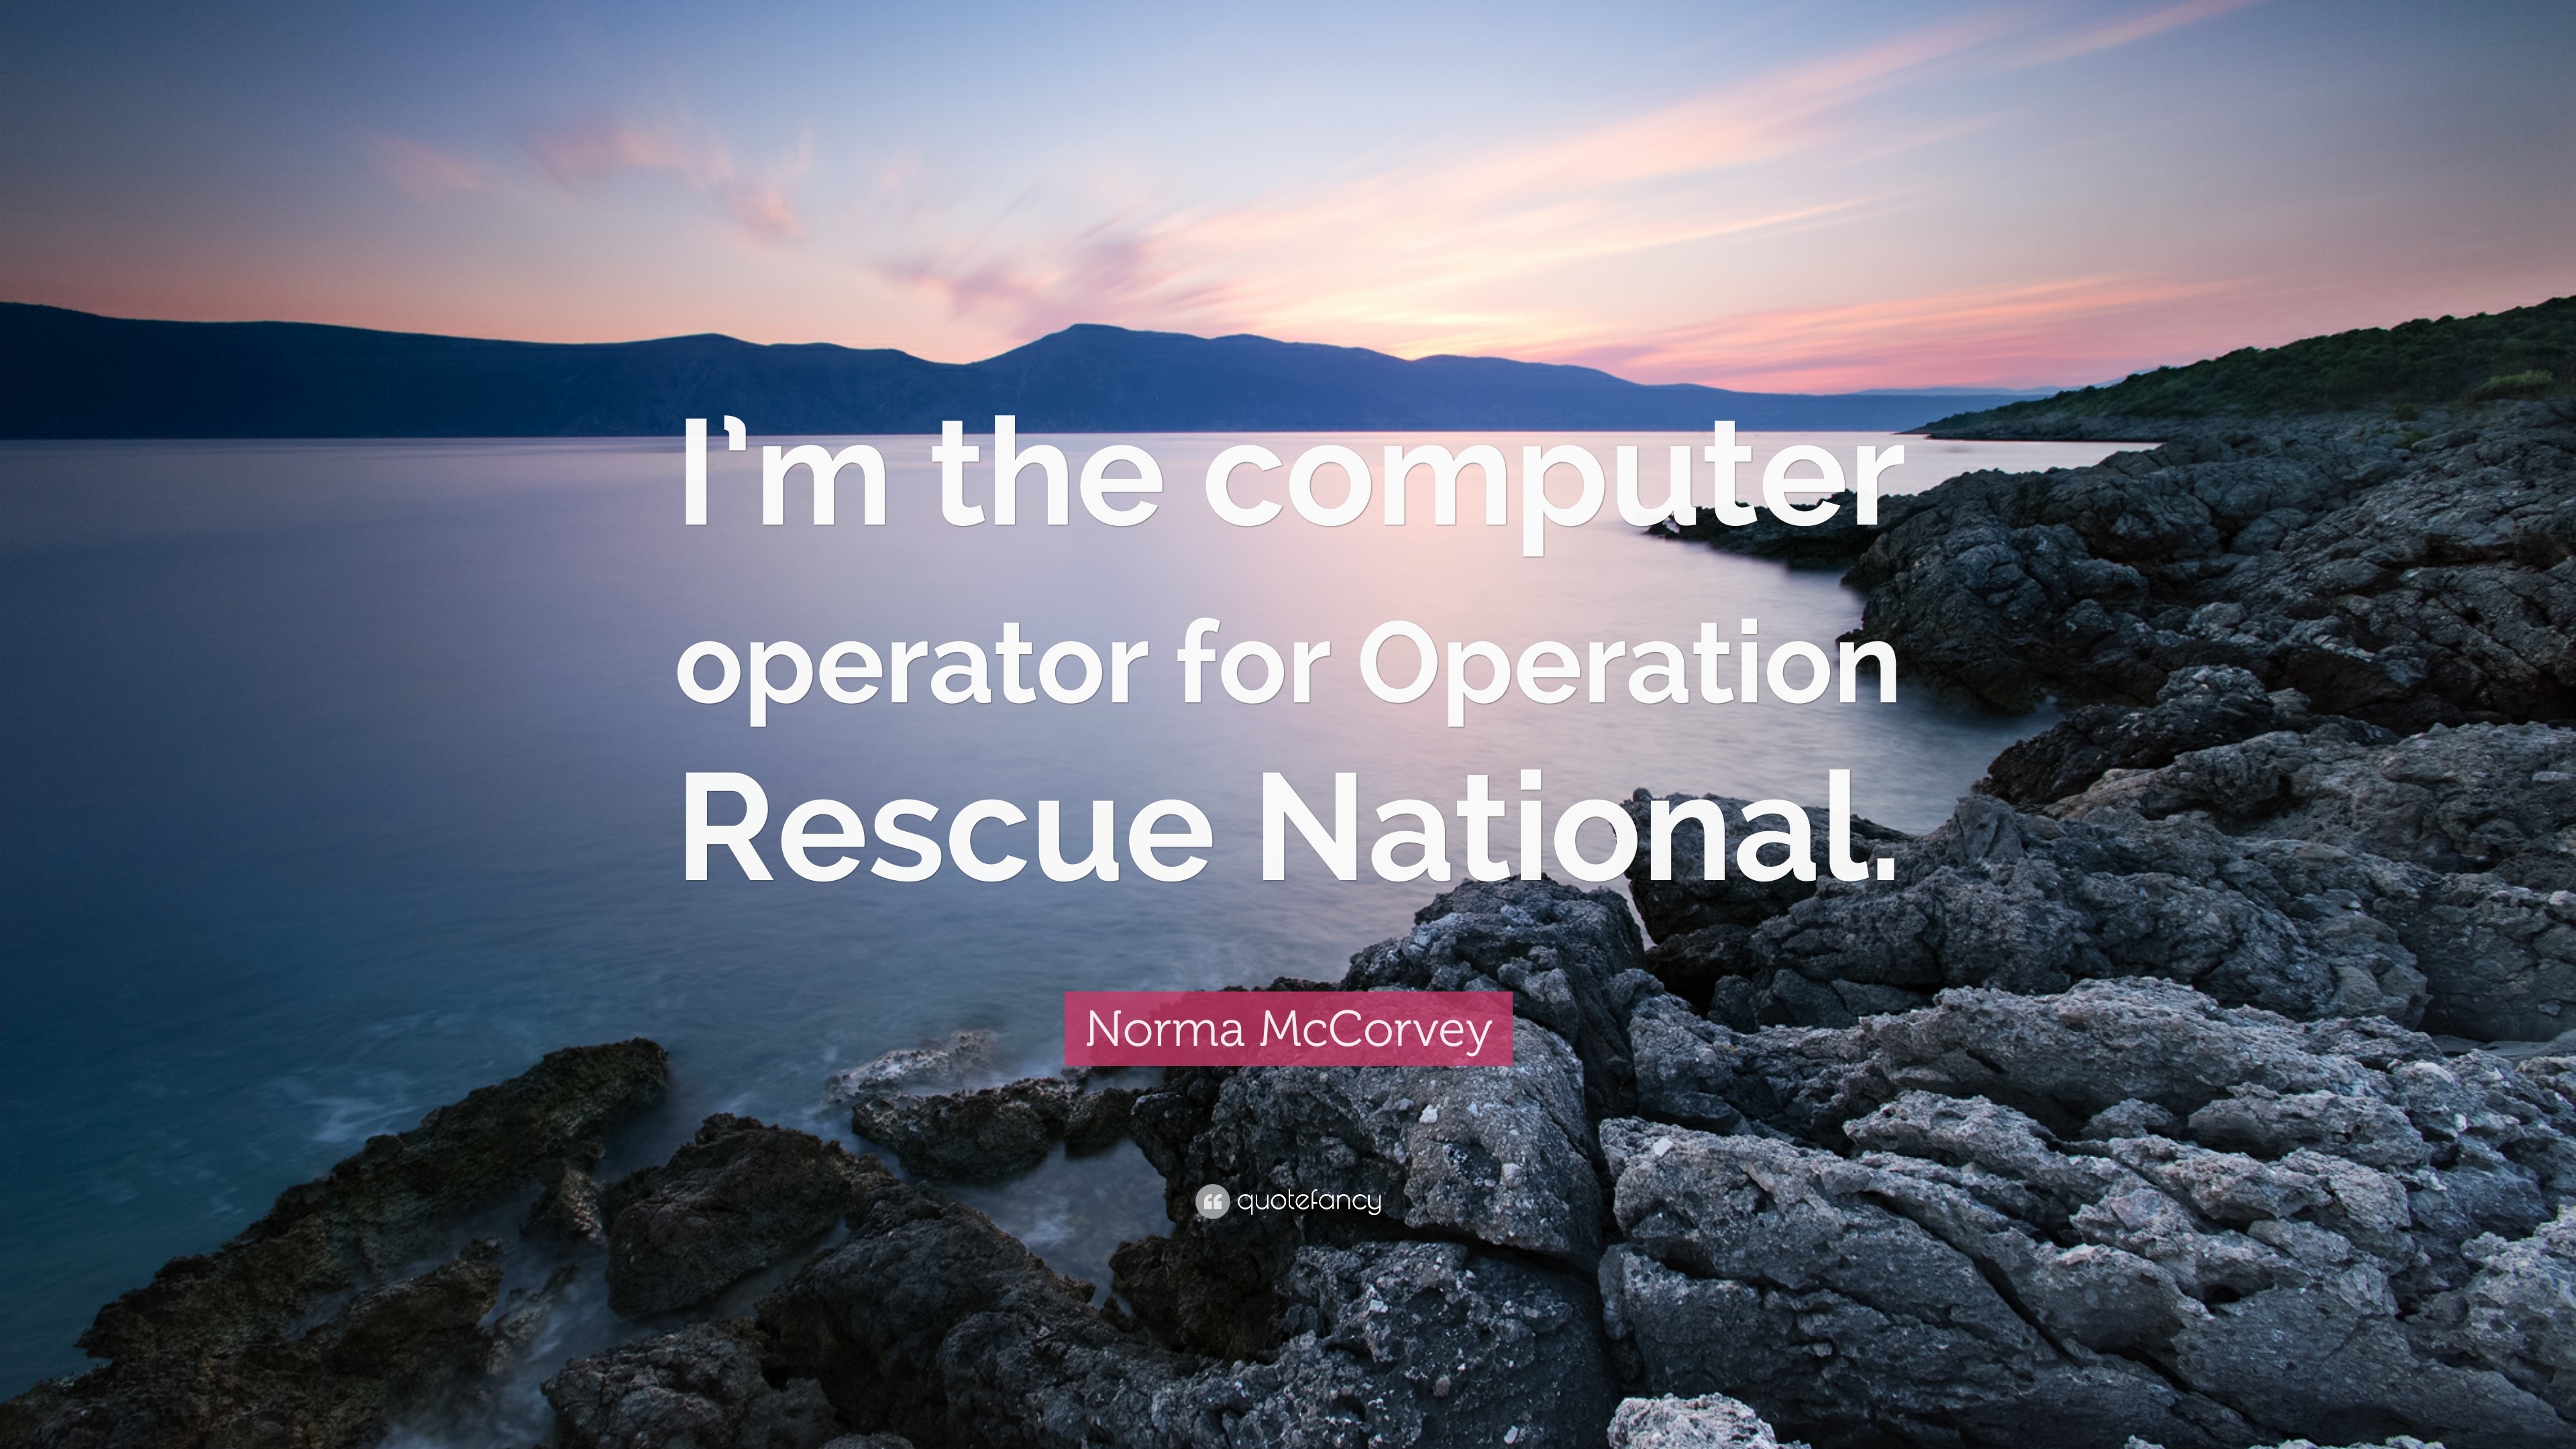 Norma McCorvey Quote: “I'm the computer operator for Operation Rescue  National.”